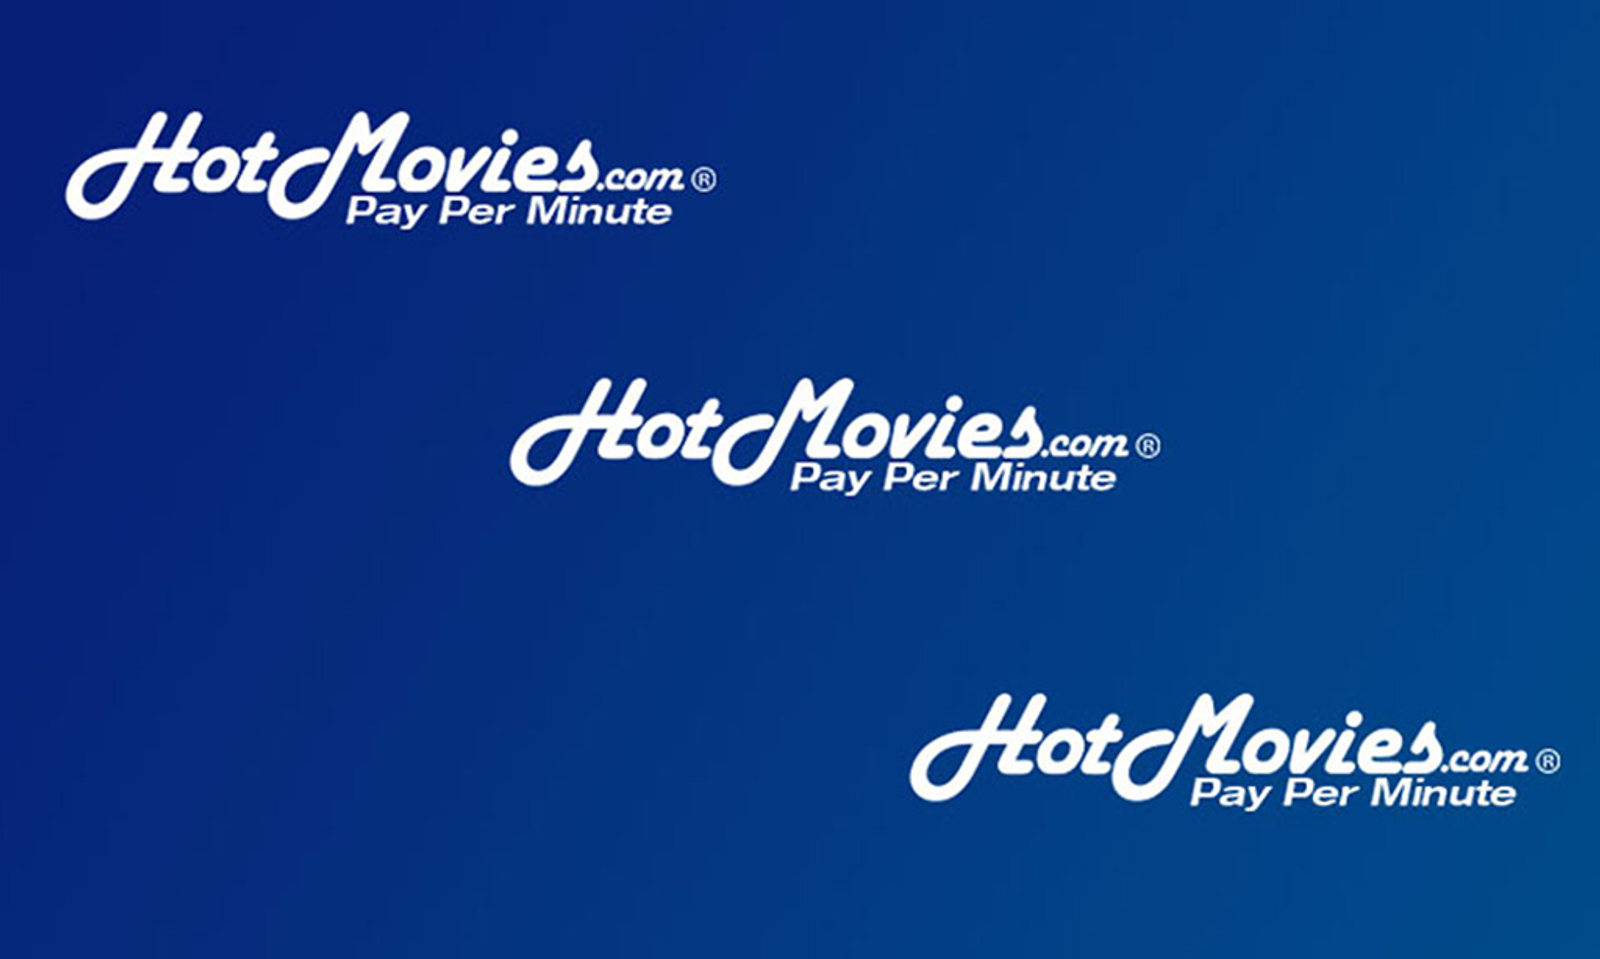 HotMovies Now Offering Adult Classics Remastered in HD on VOD | AVN